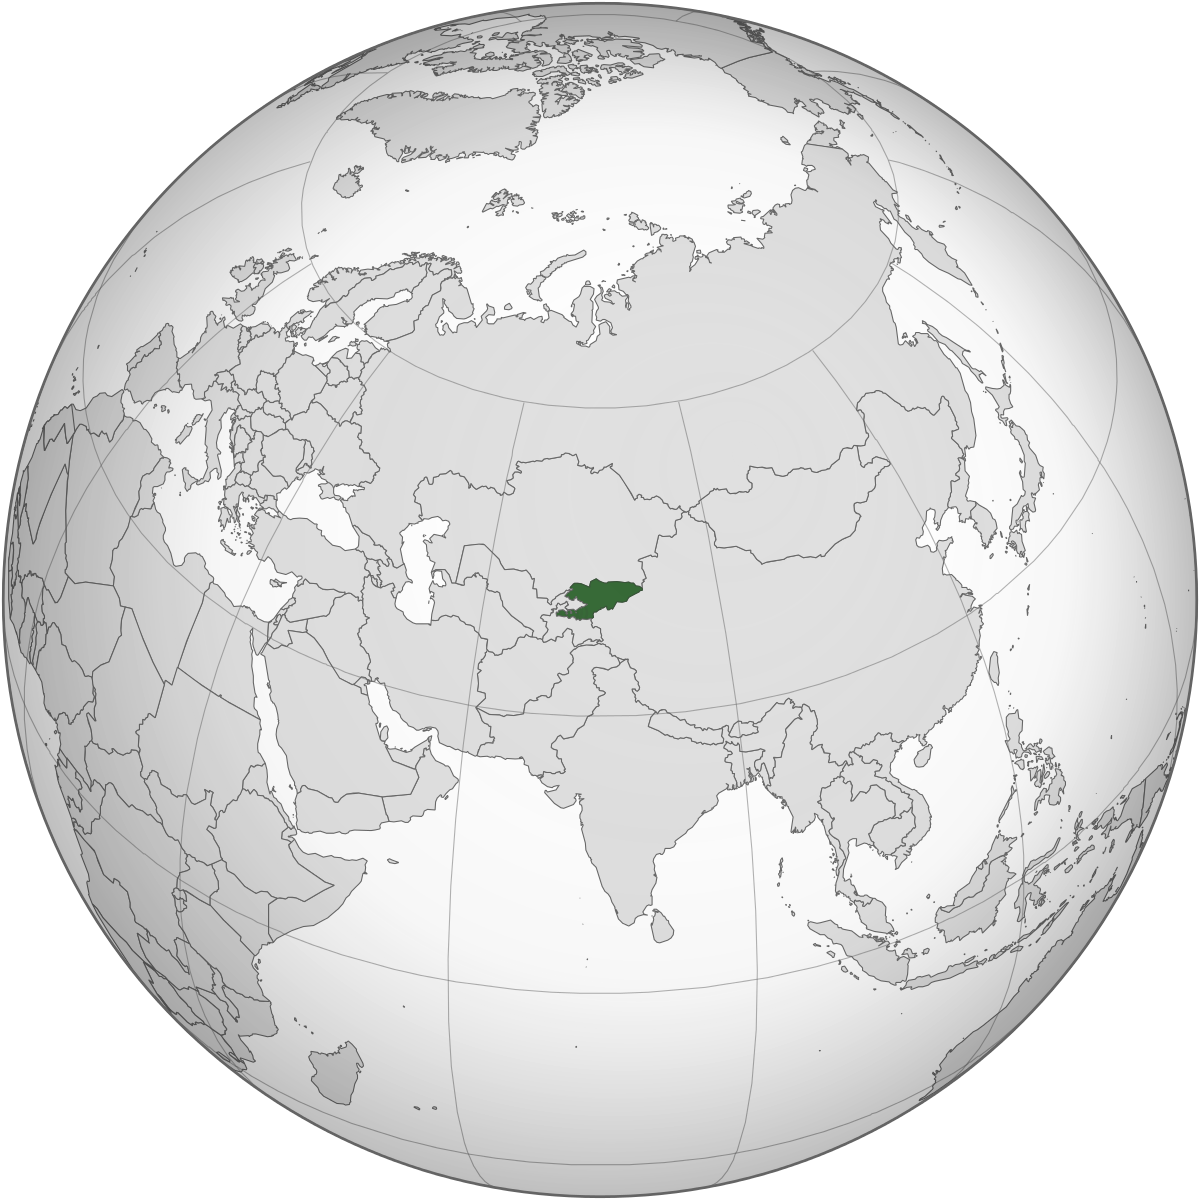 Kyrgyzstan_(orthographic_projection).svg